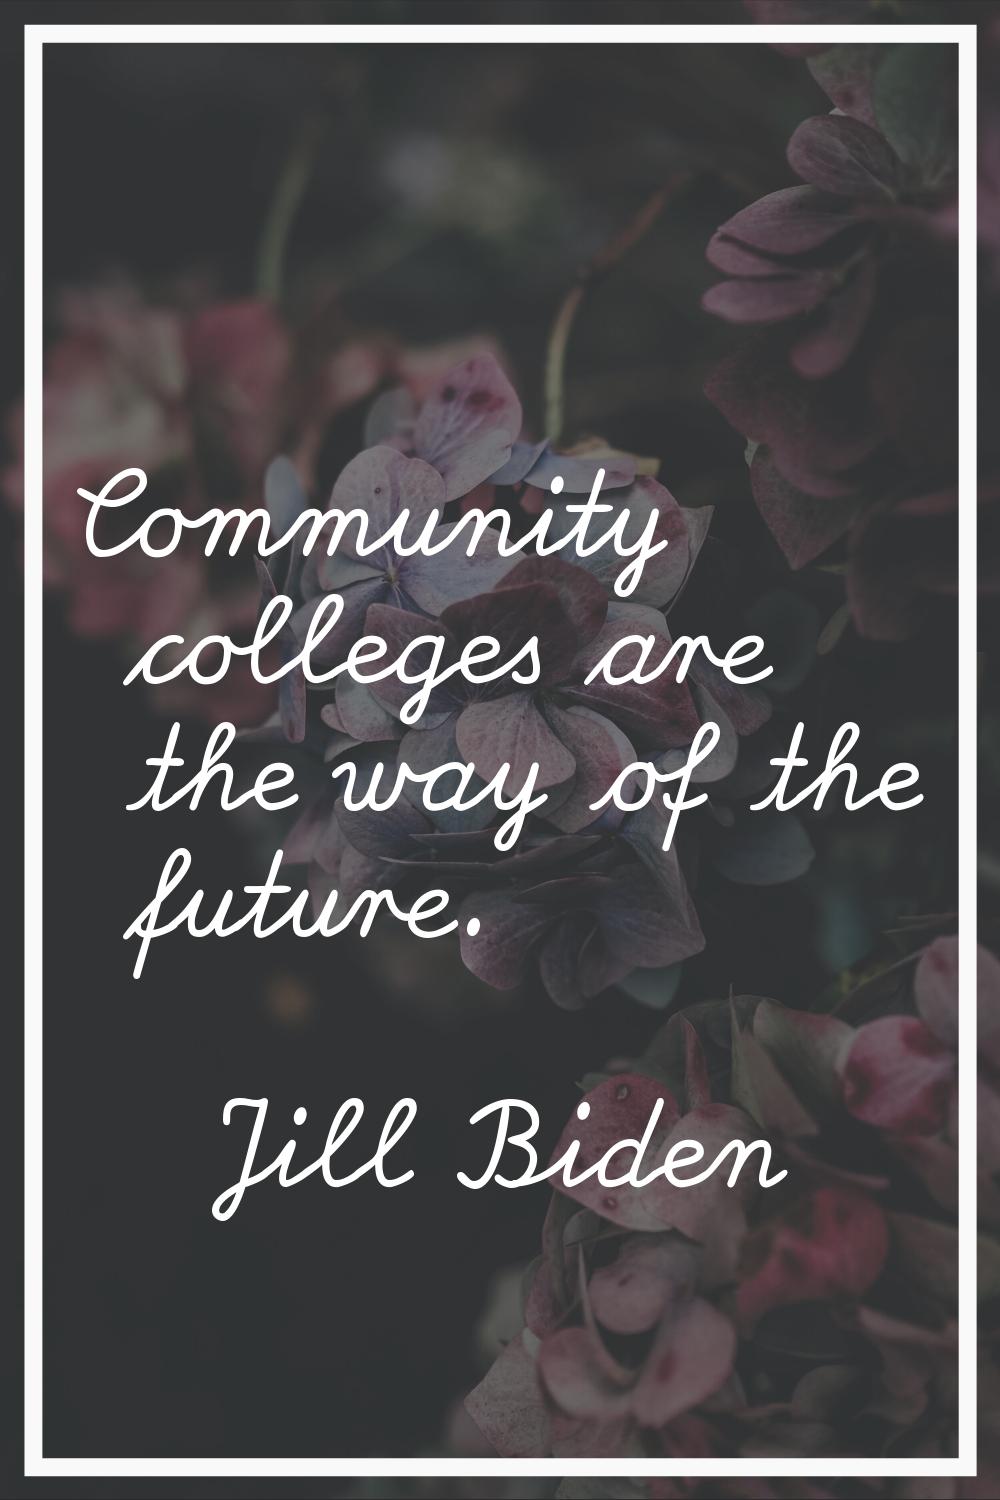 Community colleges are the way of the future.